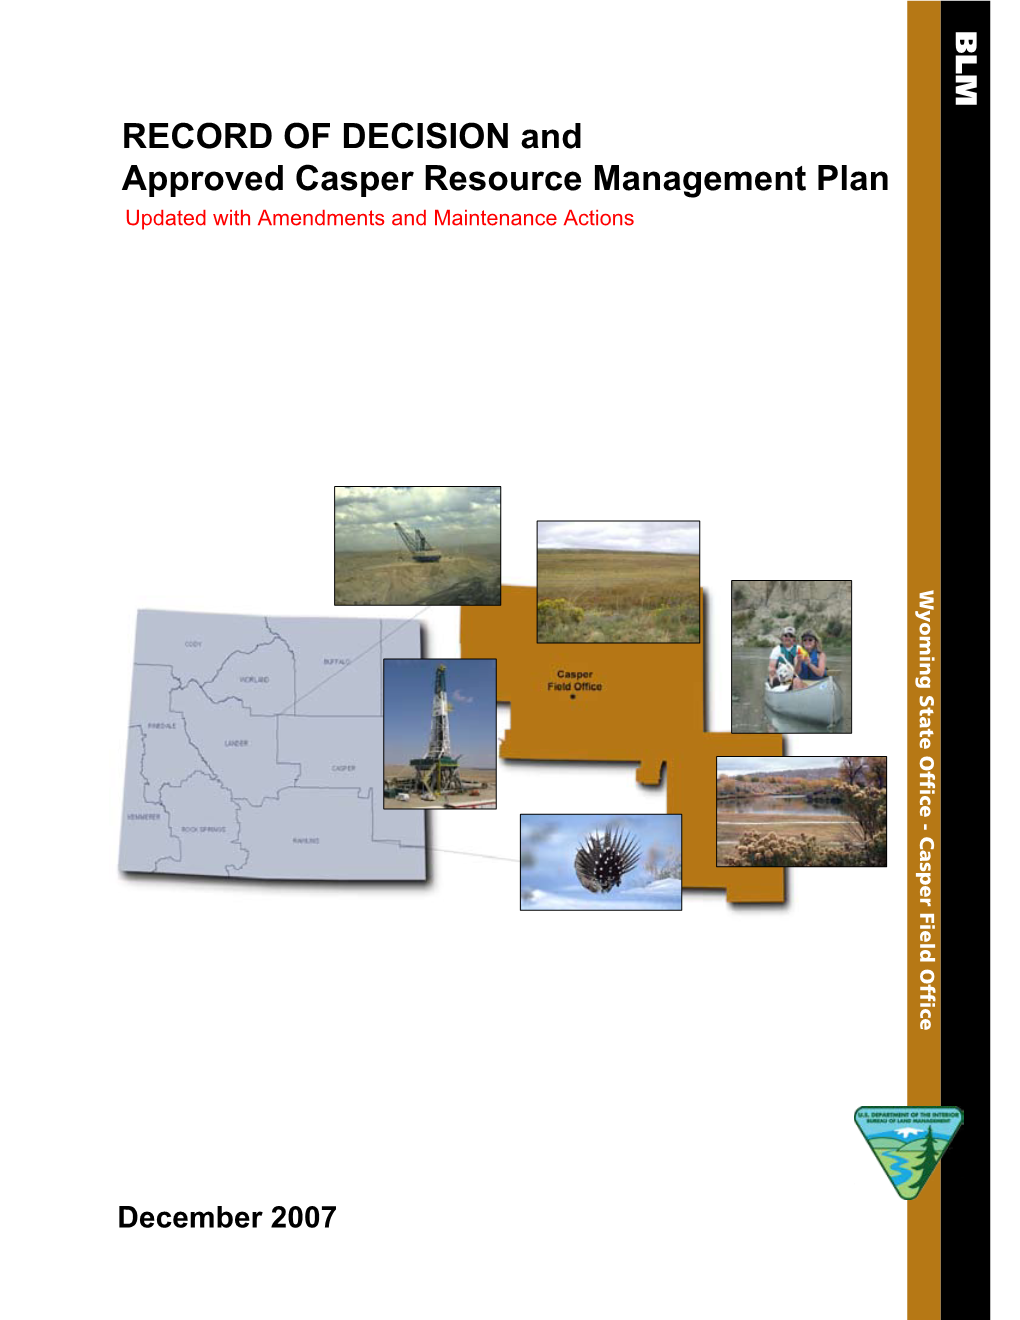 RECORD of DECISION and Approved Casper Resource Management Plan Updated with Amendments and Maintenance Actions